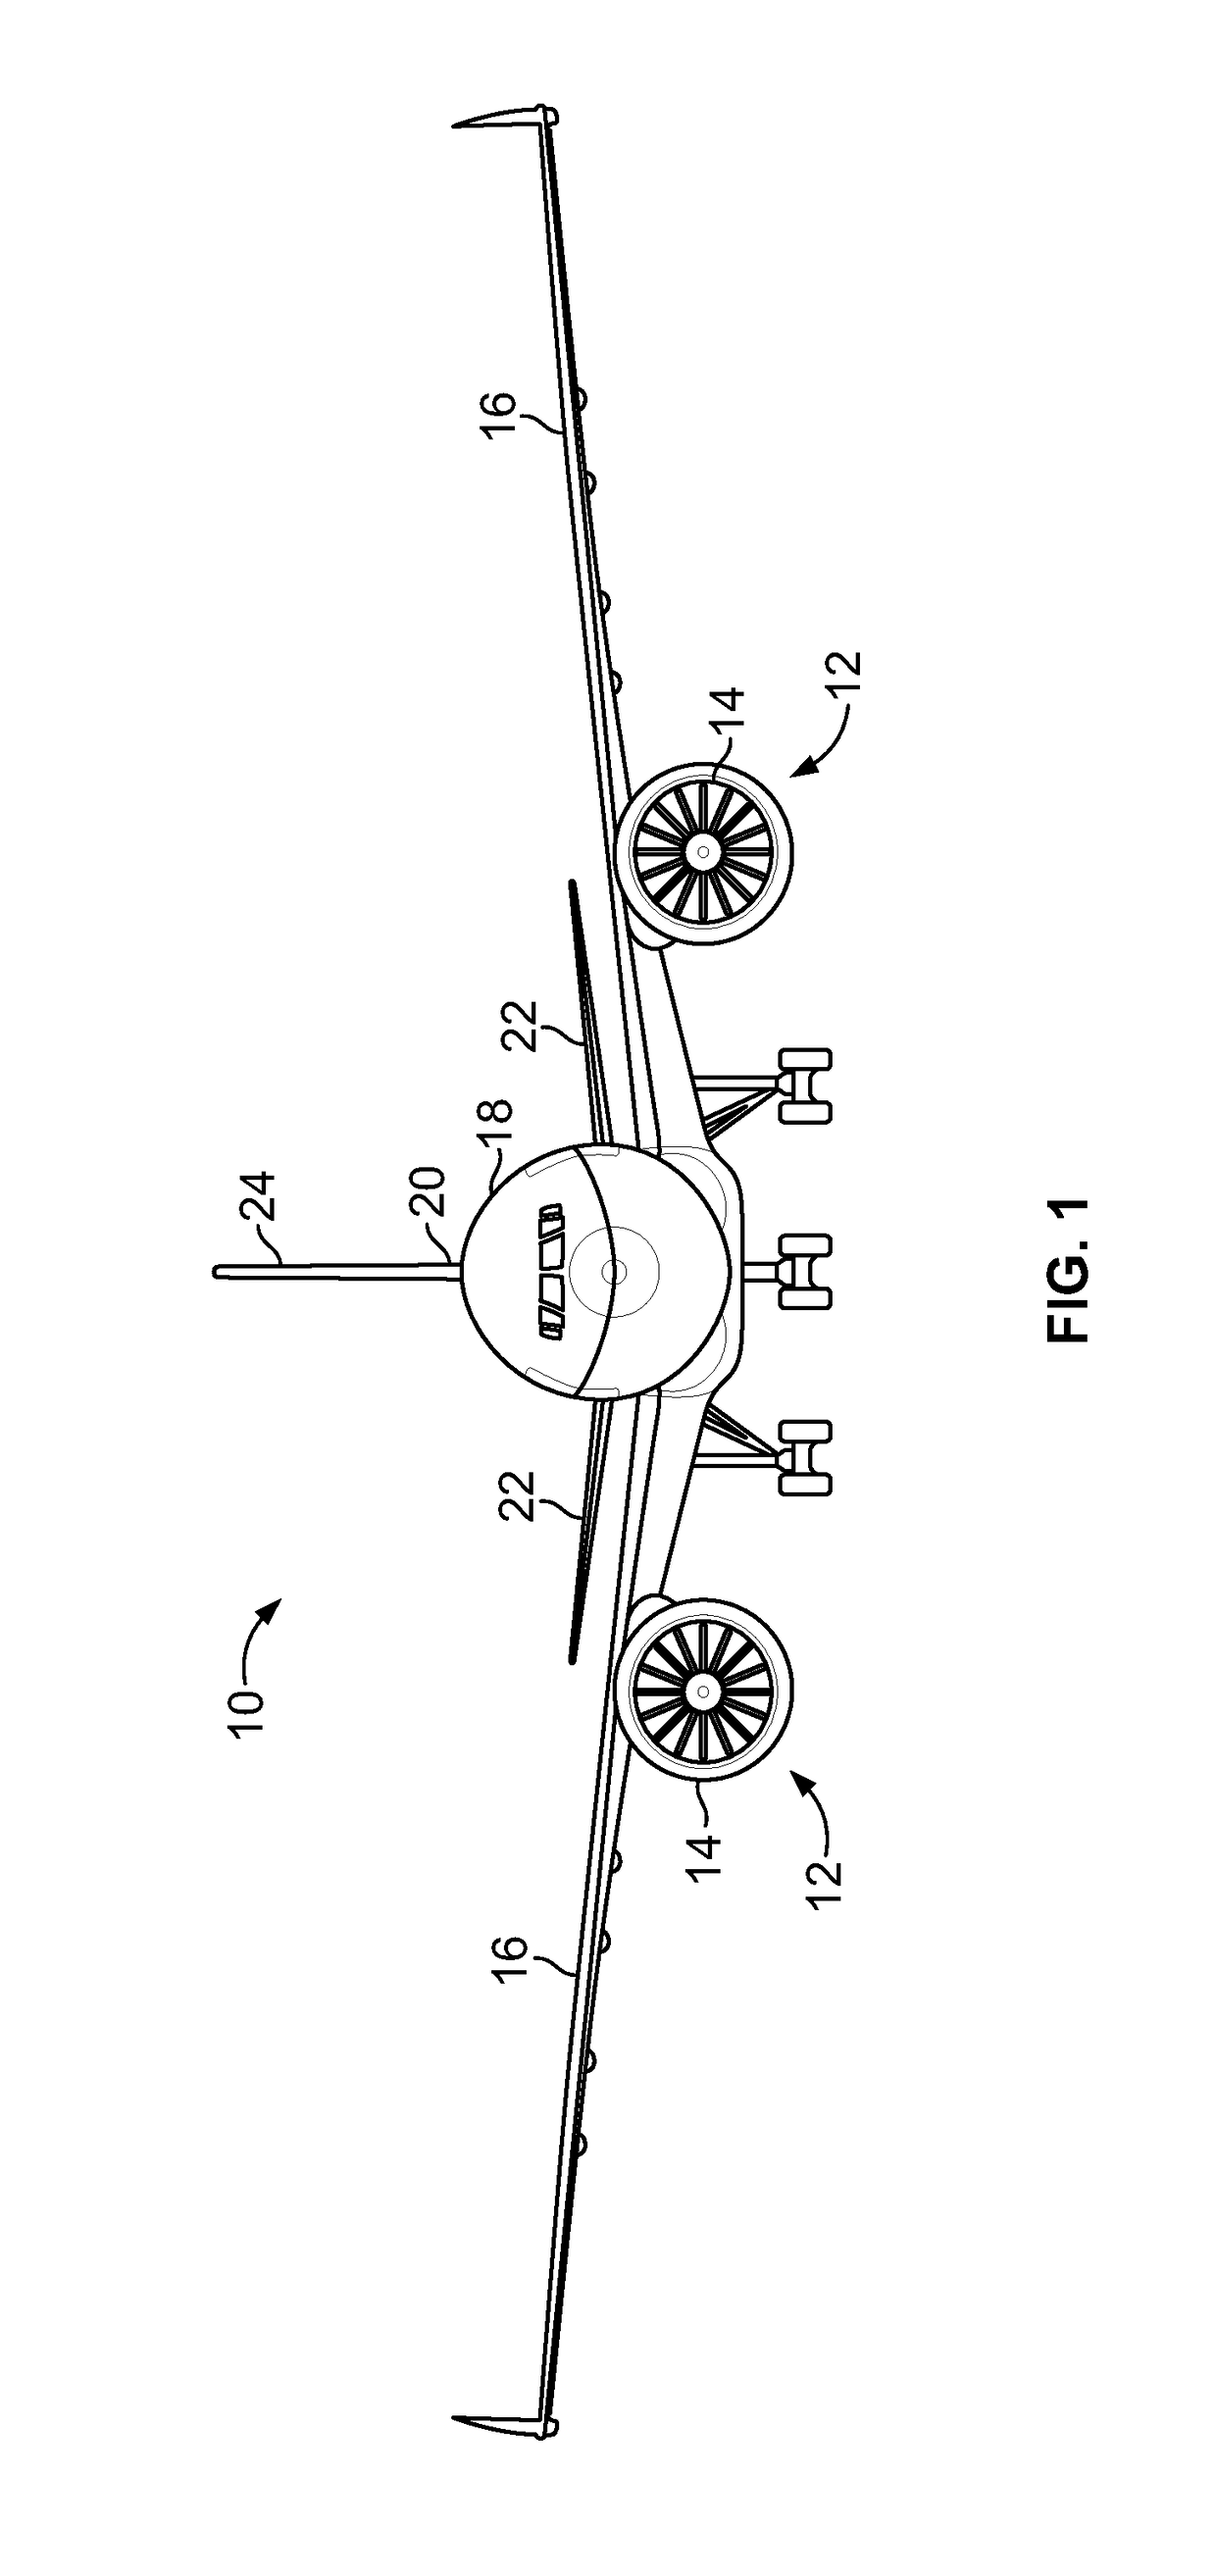 Accent lighting system for an interior cabin of a vehicle